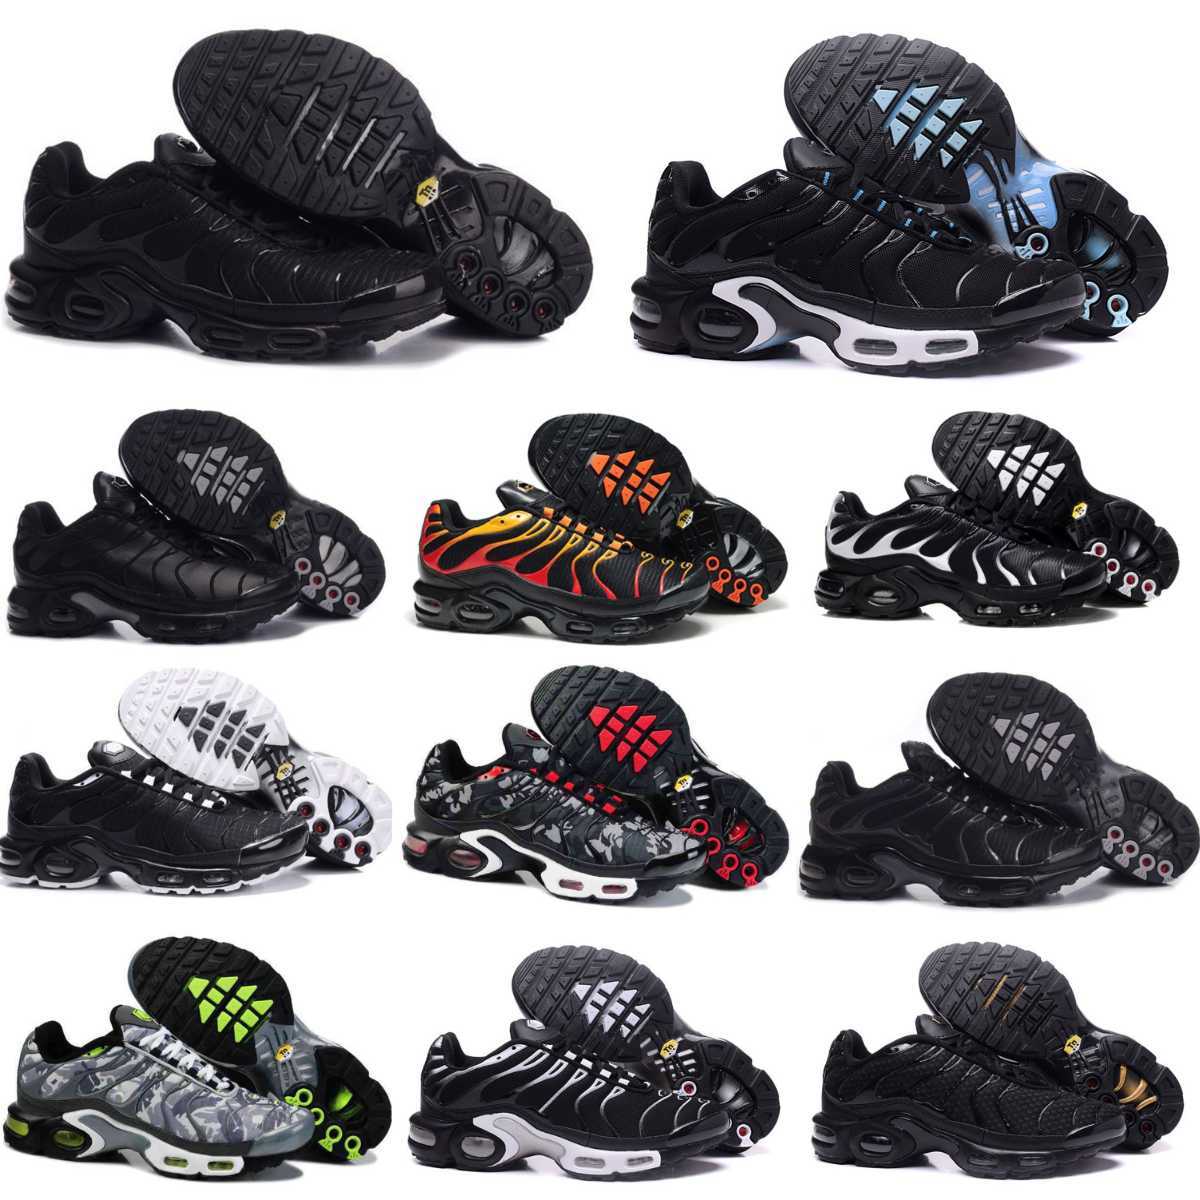 

2023 Mens Tn Running Shoes Tns OG Triple Black White Be True Max Plus Ultra Seafoam Grey Frost Pink Teal Volt Blue Crinkled Metal Chaussures Requin Designer Sneakers S2, Please contact us